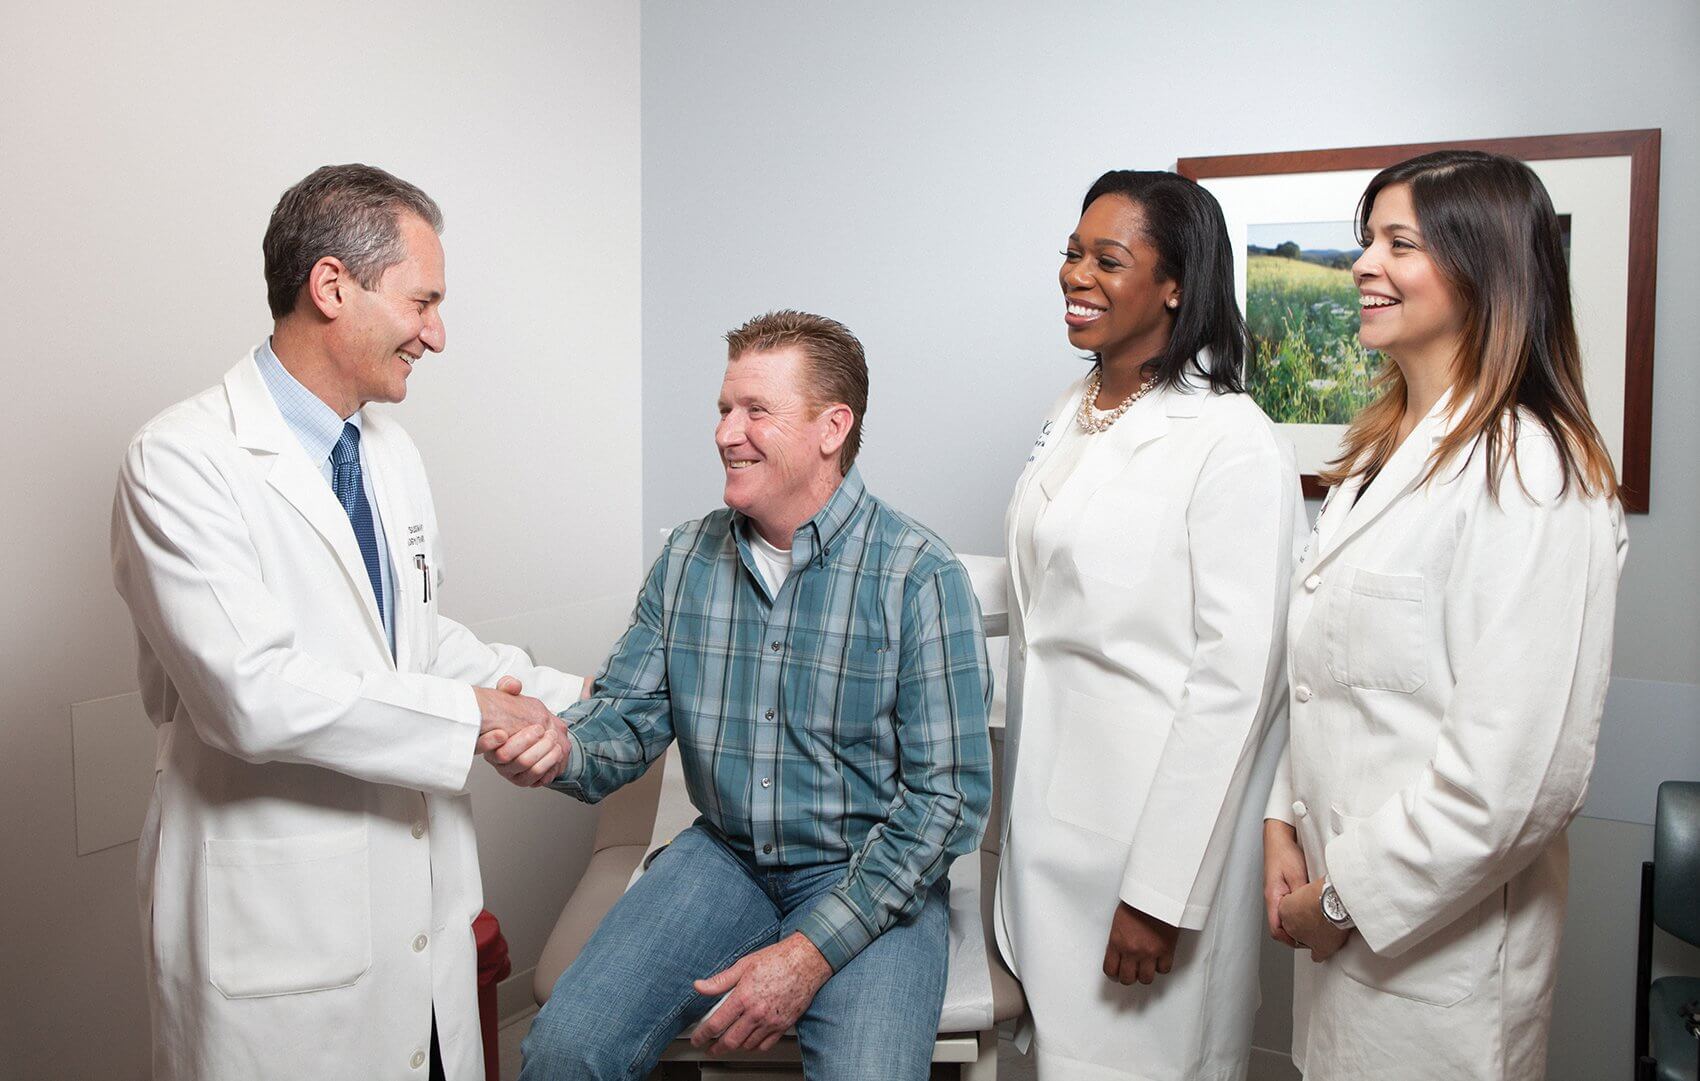 From left, Norman Sussman, M.D., director of Project ECHO, and patient John Rocks met for the first time after Rocks was cured of hepatitis C. Pictured with Renita Madu, the physician assistant who directly treated Rocks, and Project ECHO associate director Saira Khaderi, M.D.